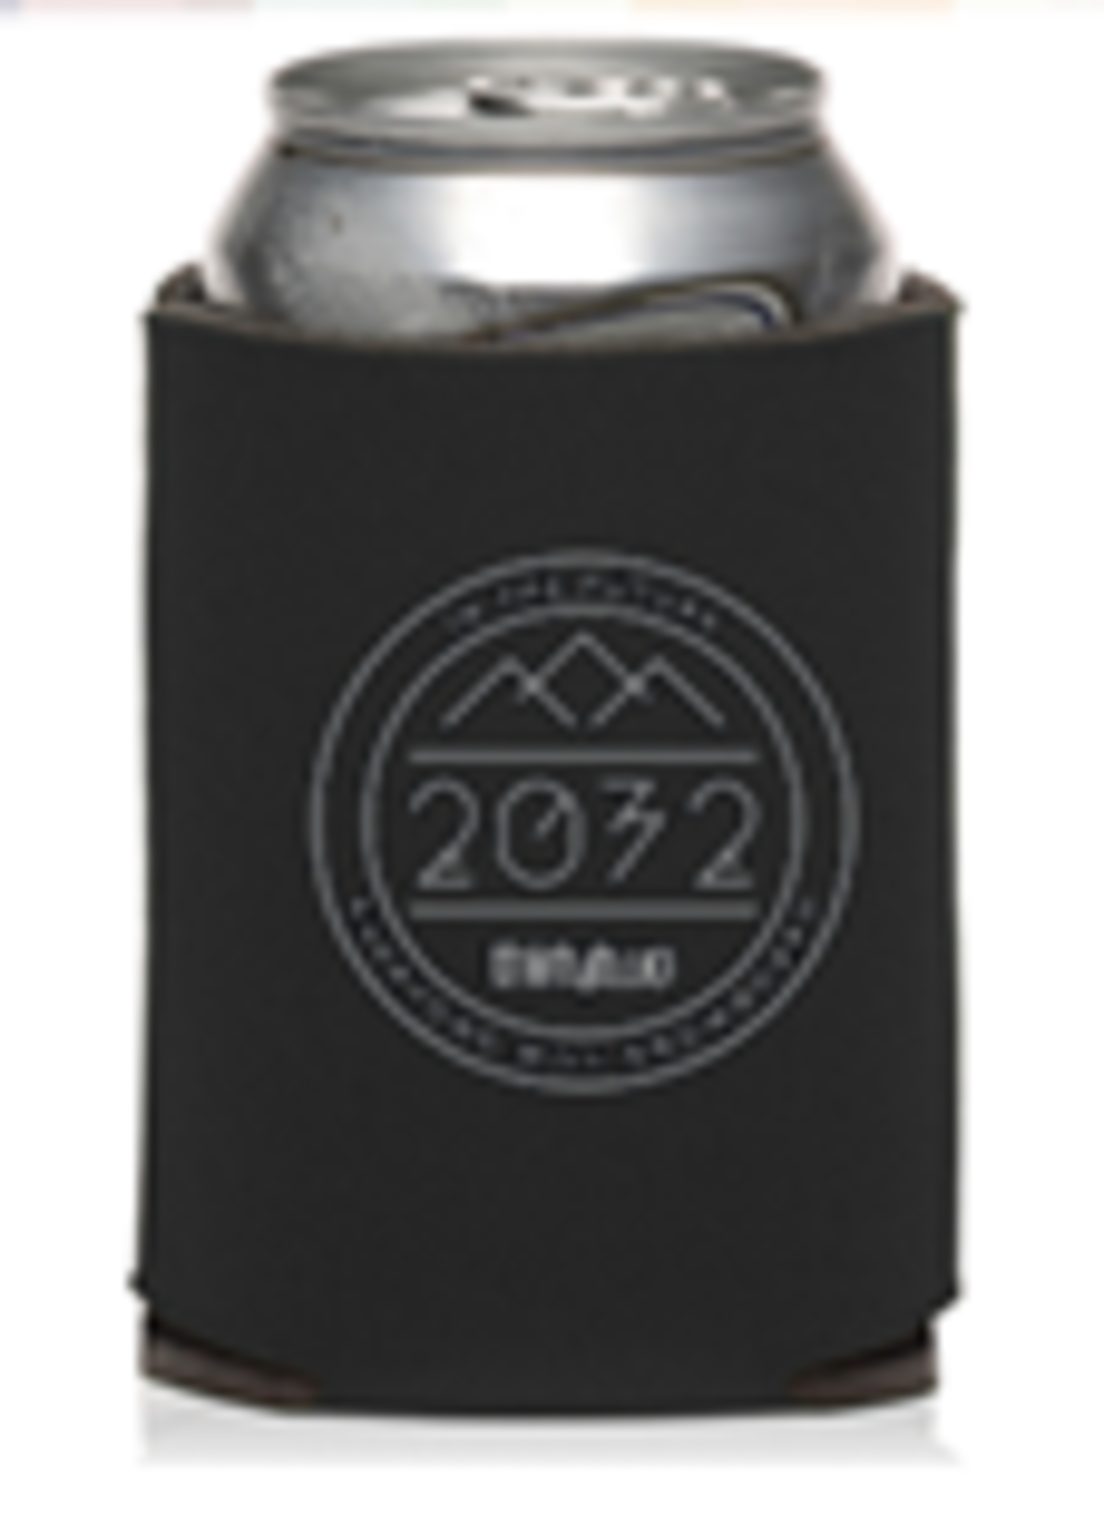 Thirtytwo 2032 Beer Koozie No Color Point Of Purchase